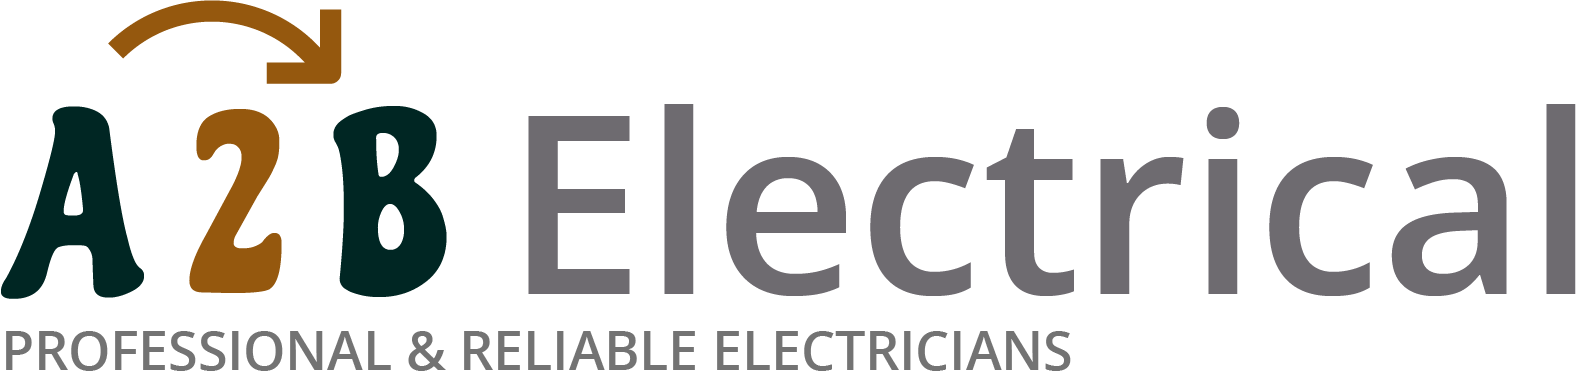 If you have electrical wiring problems in Chesterfield, we can provide an electrician to have a look for you. 